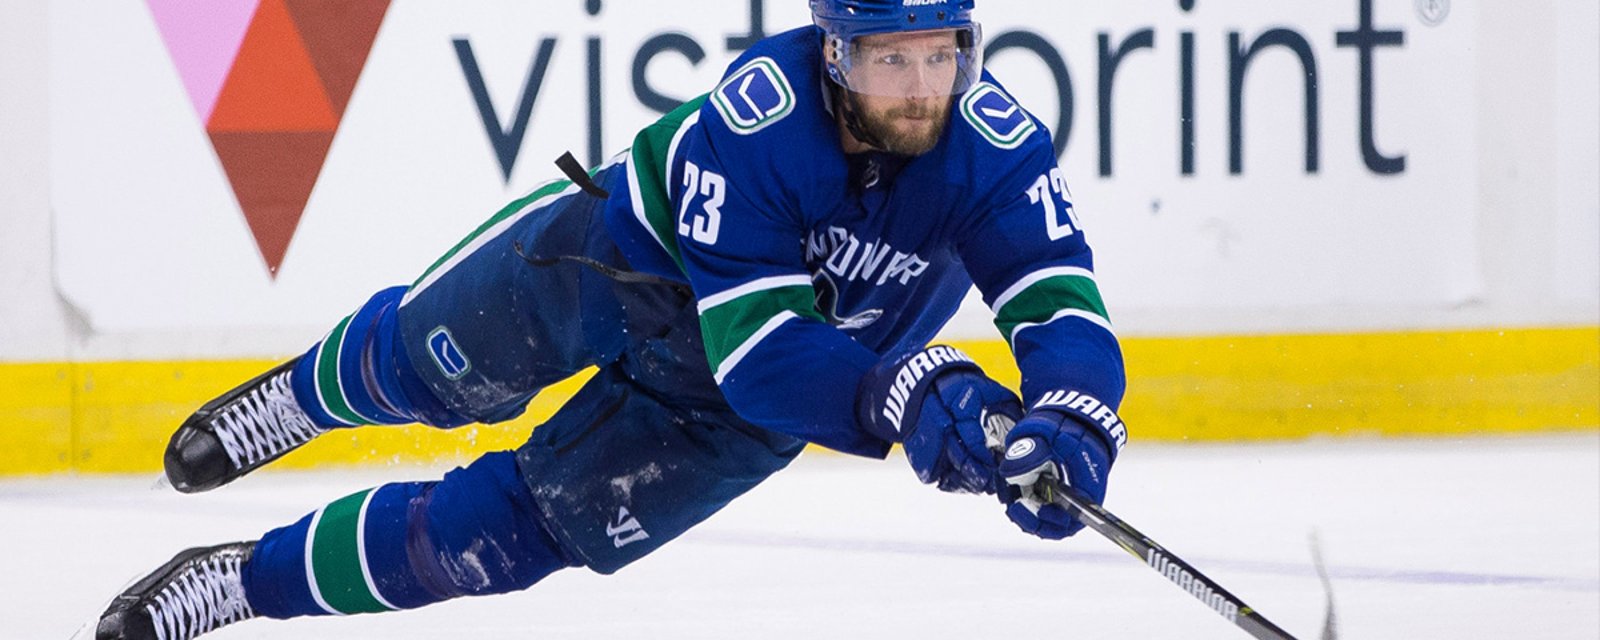 Breaking: The worst is confirmed for Canucks and Edler